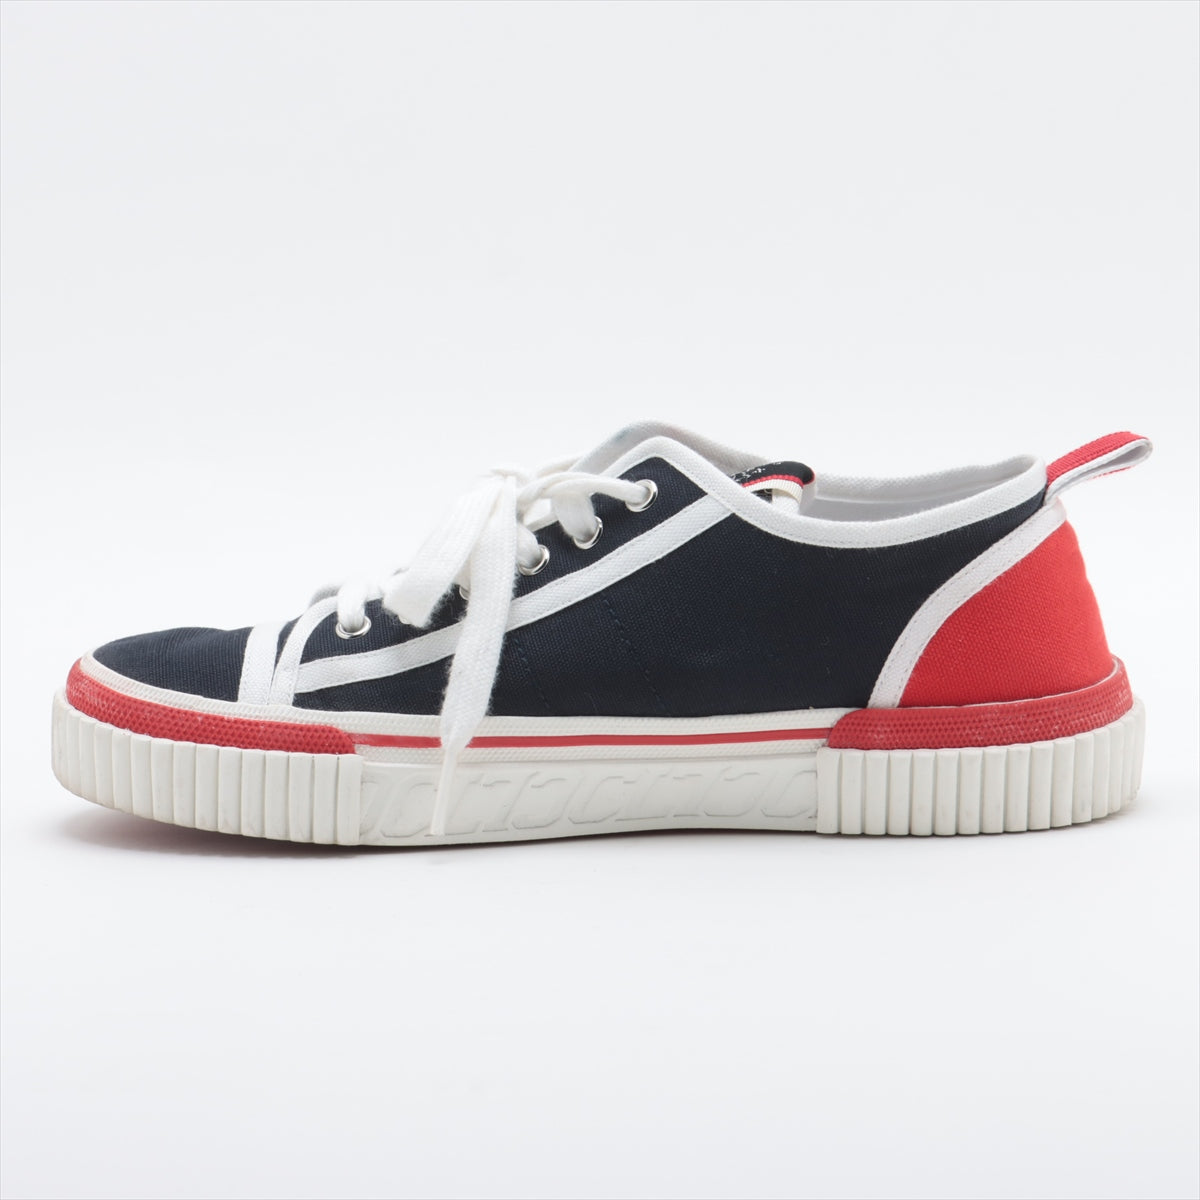 Christian Louboutin Canvas & leather Sneakers 40 Men's Navy x red